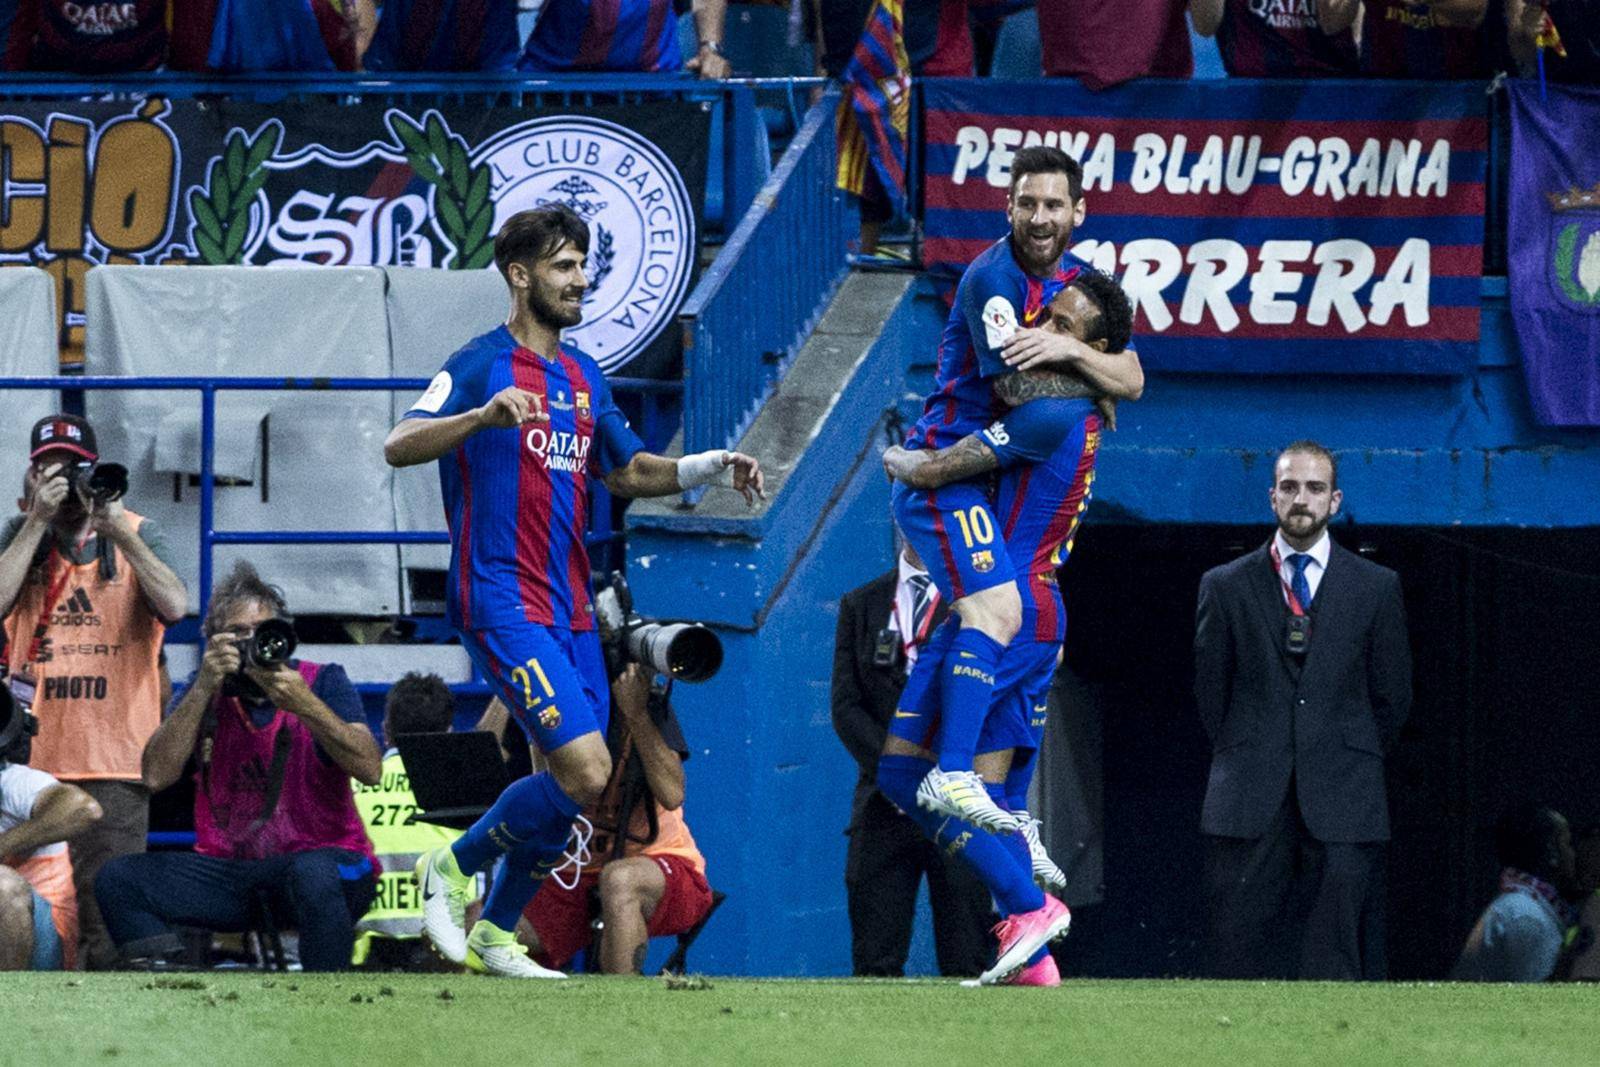 Copa del Rey (King's Cup) Final between Deportivo Alaves and FC Barcelona